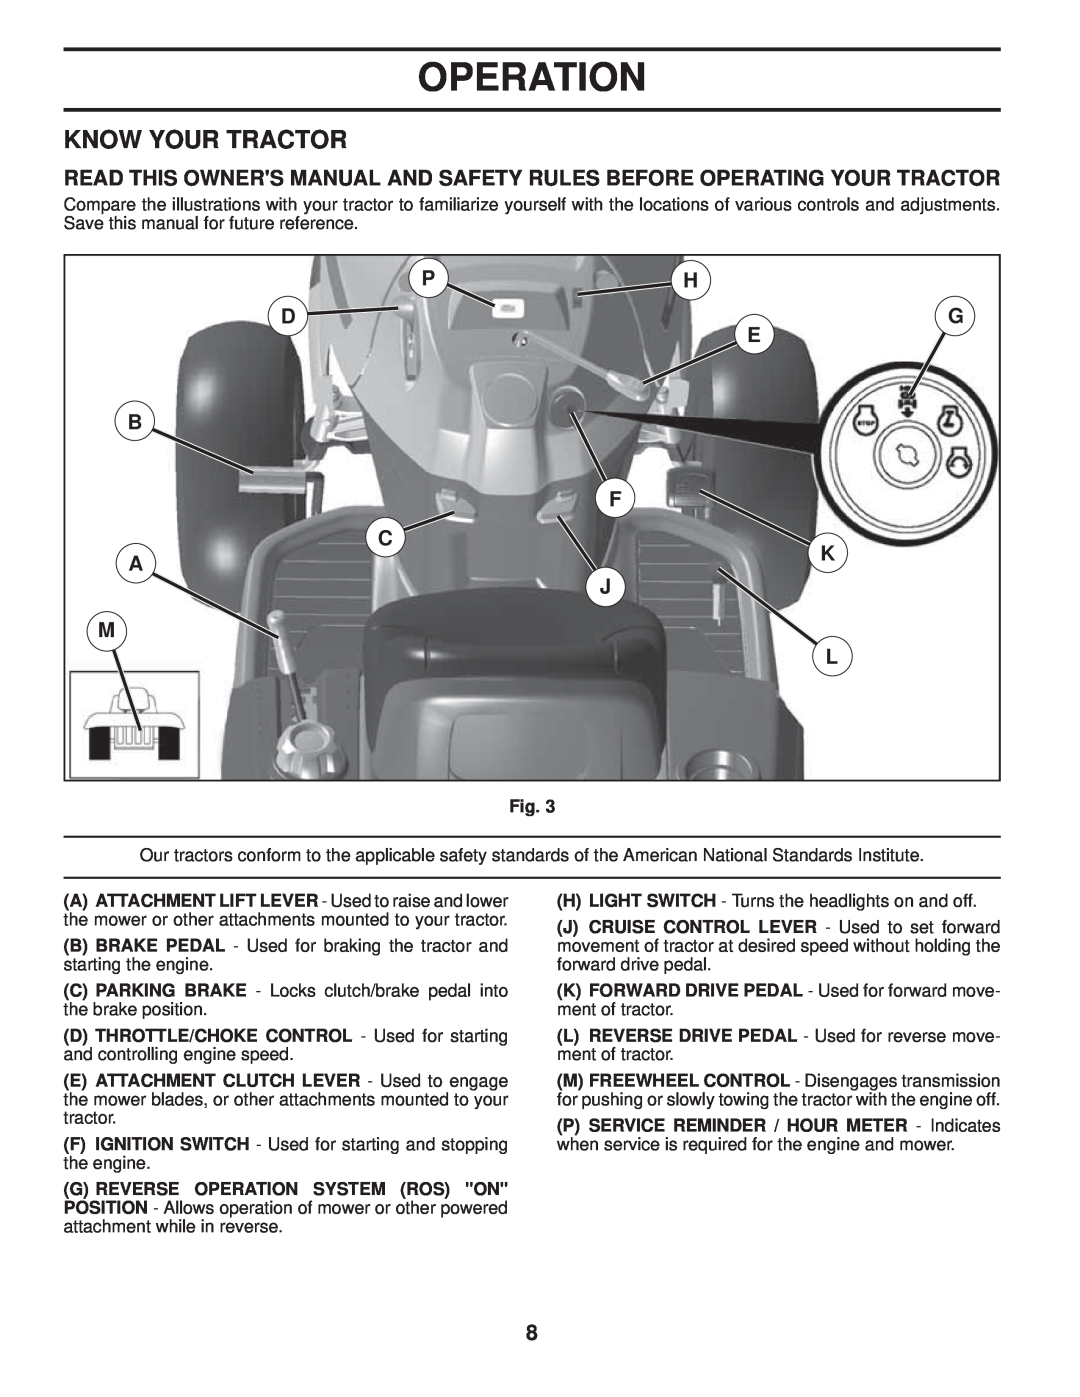 Husqvarna 960430120 owner manual Know Your Tractor, Operation 